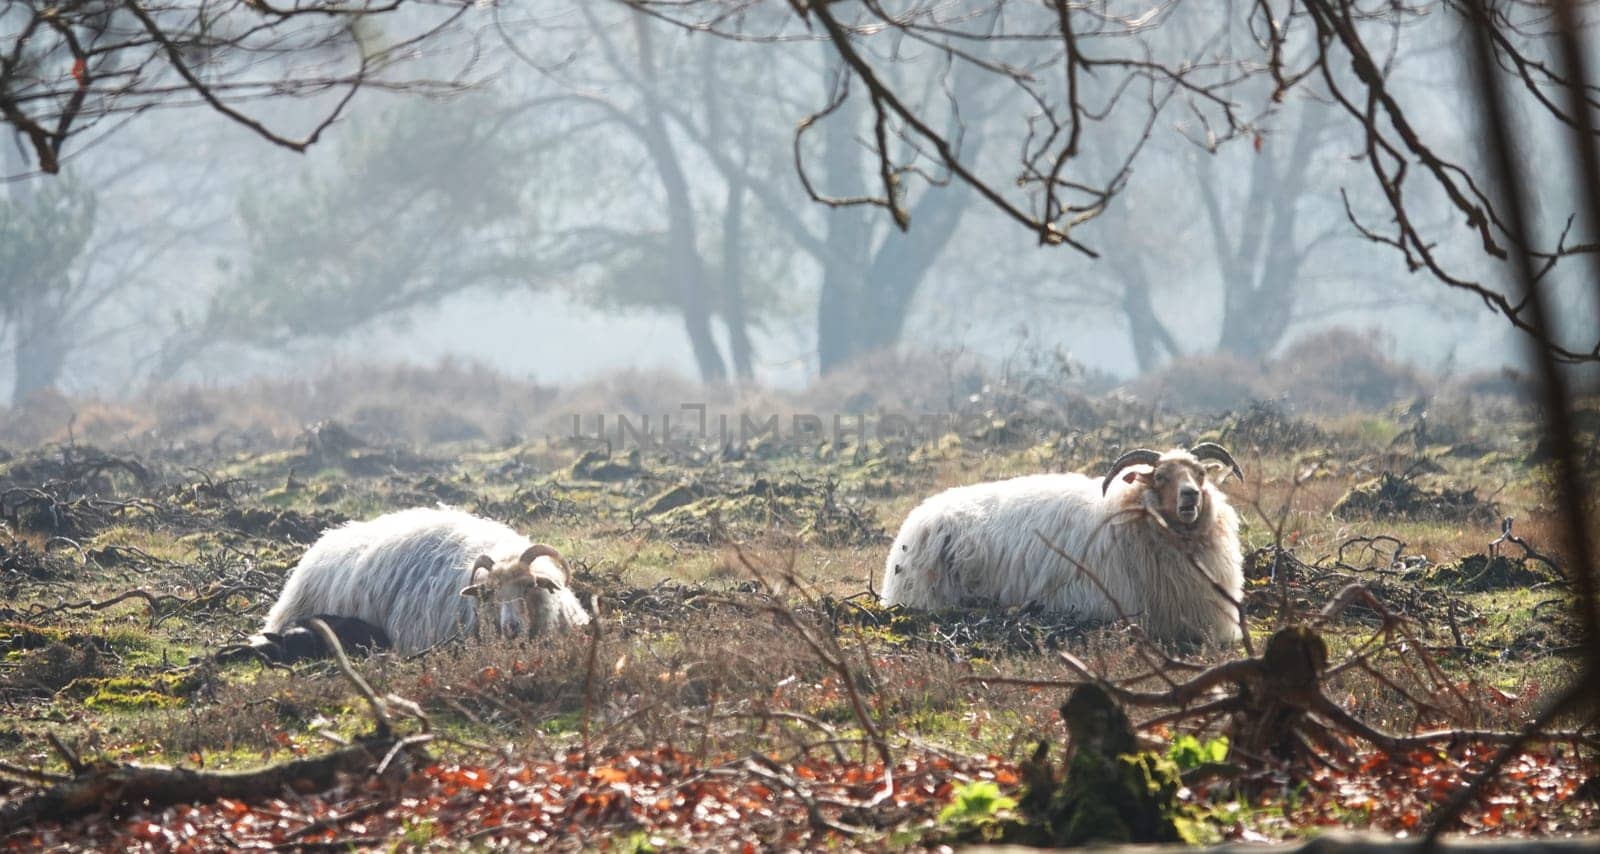 Two Drenthe Heath Sheep lie in a heathland in the early morning. The morning fog still hangs over the heath. This breed is the oldest surviving breed of sheep in Europe.